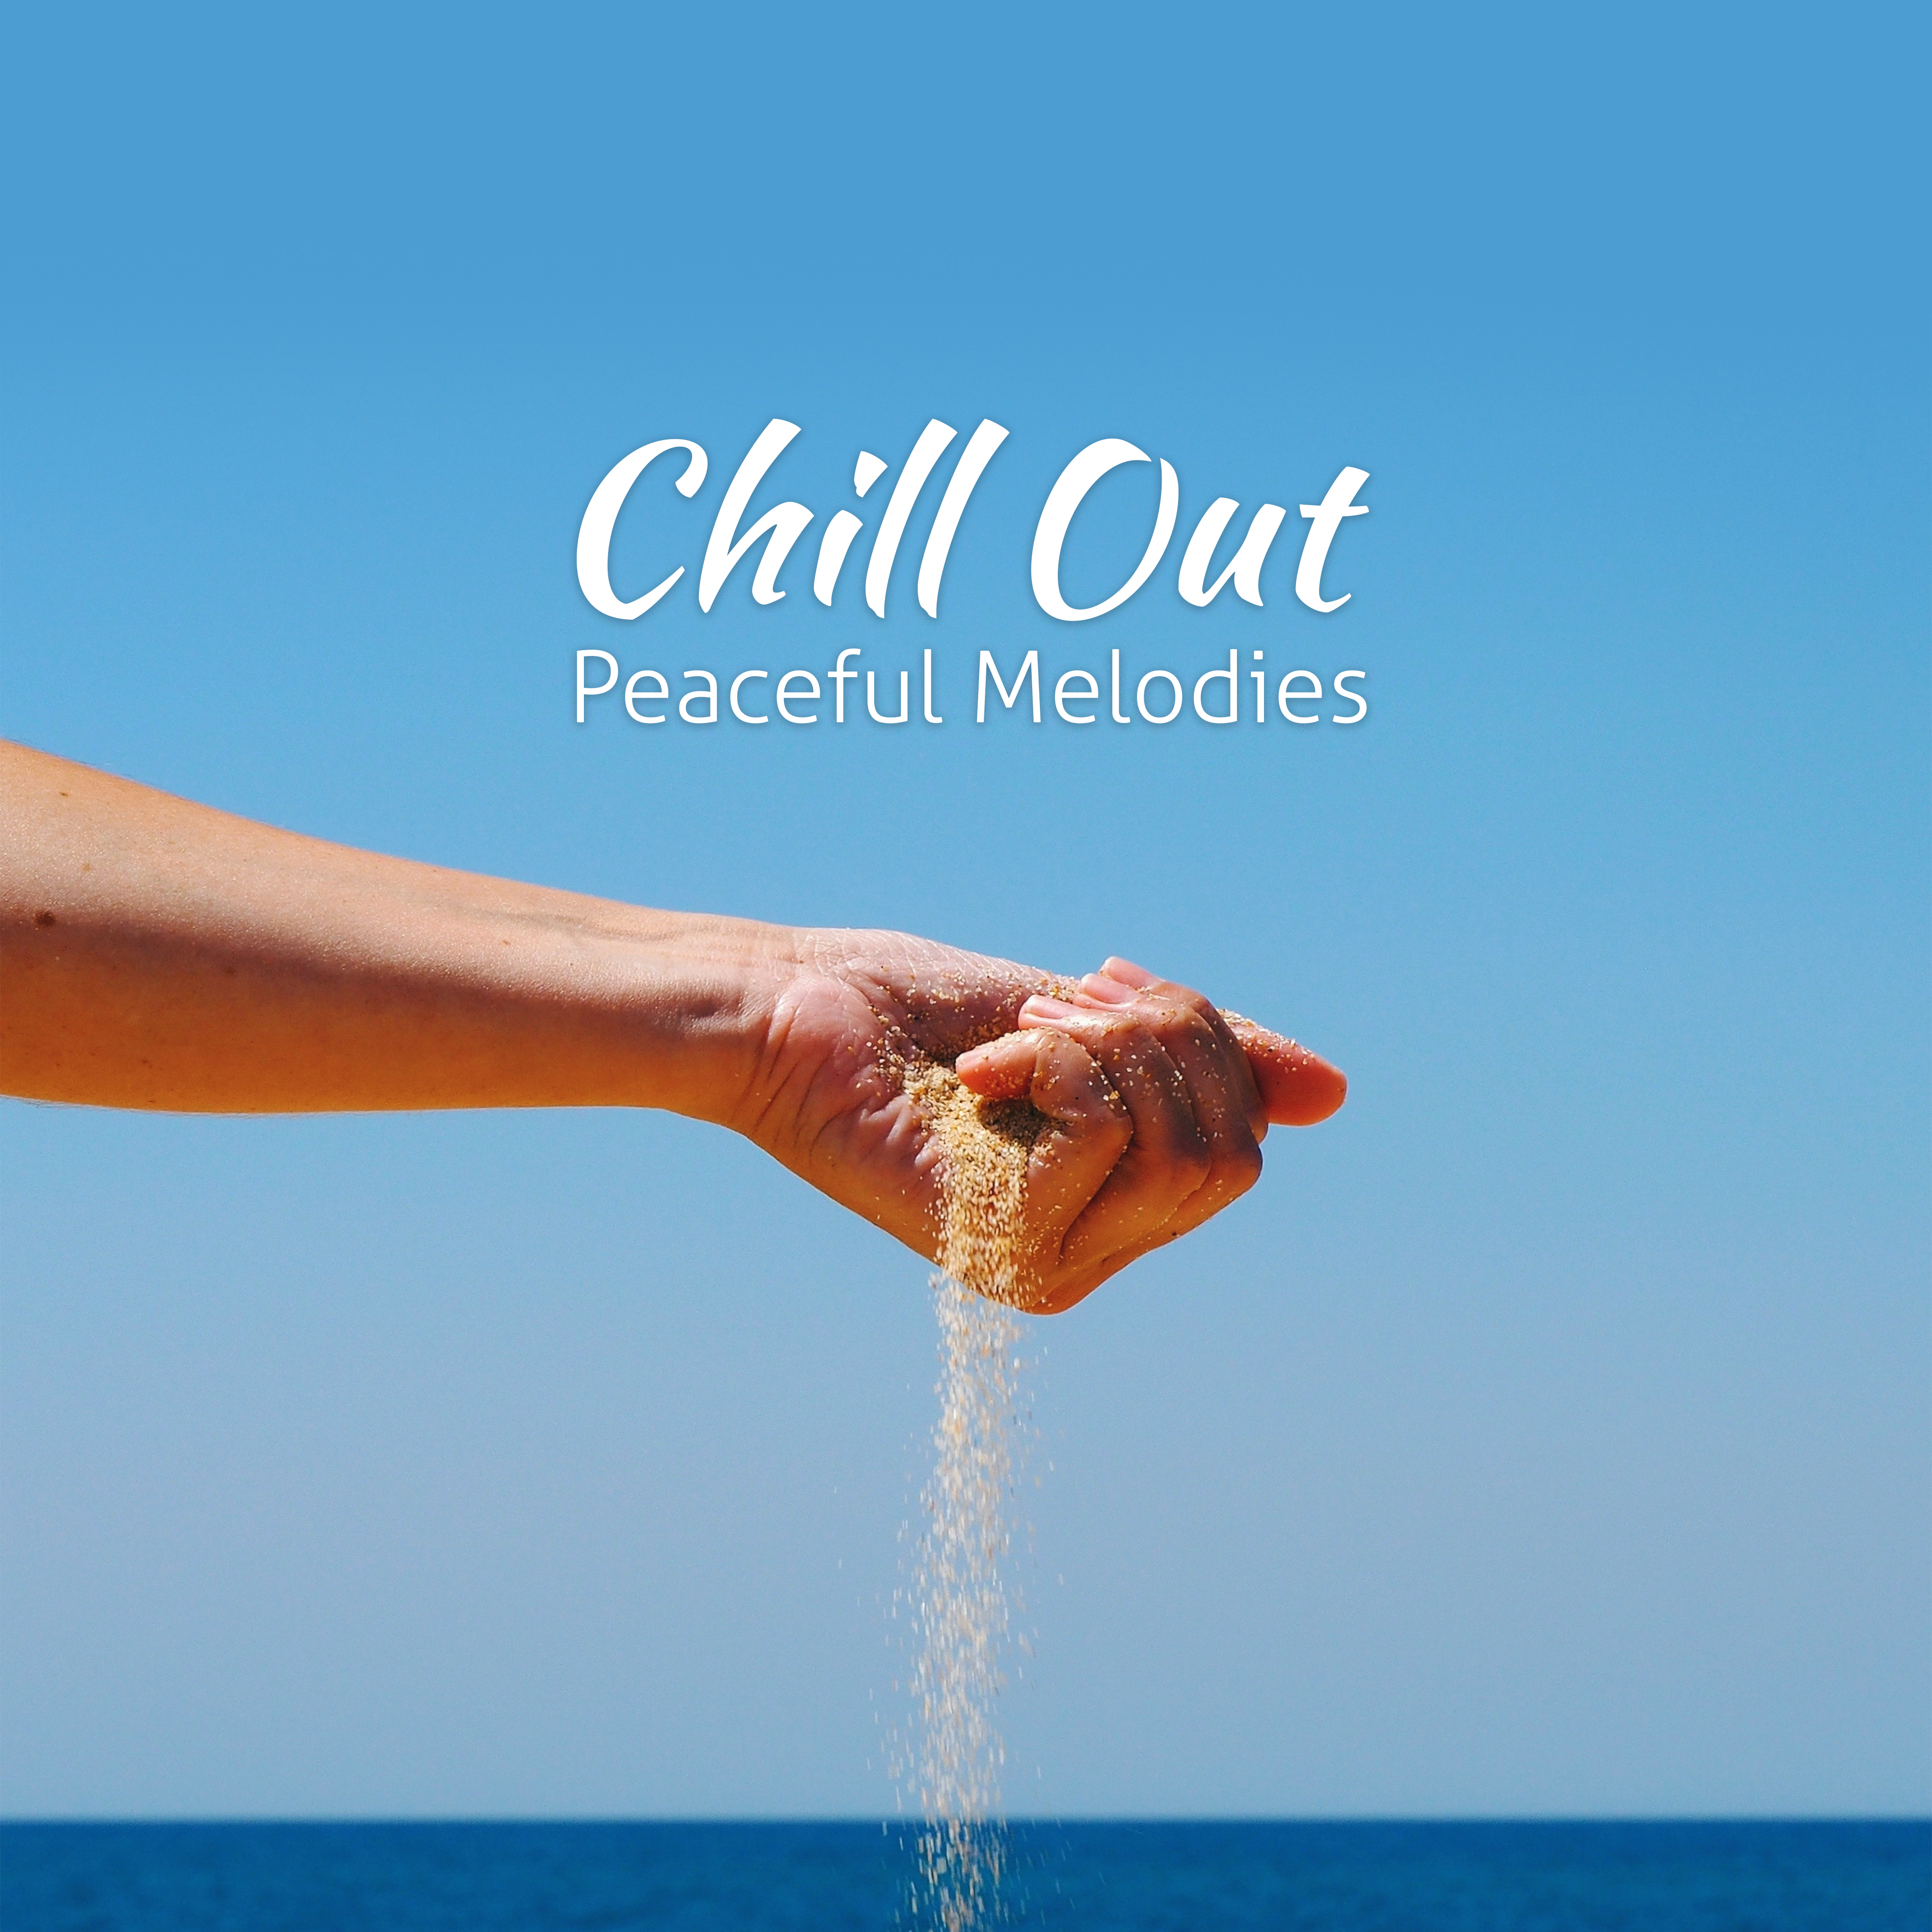 Chill Out Peaceful Melodies